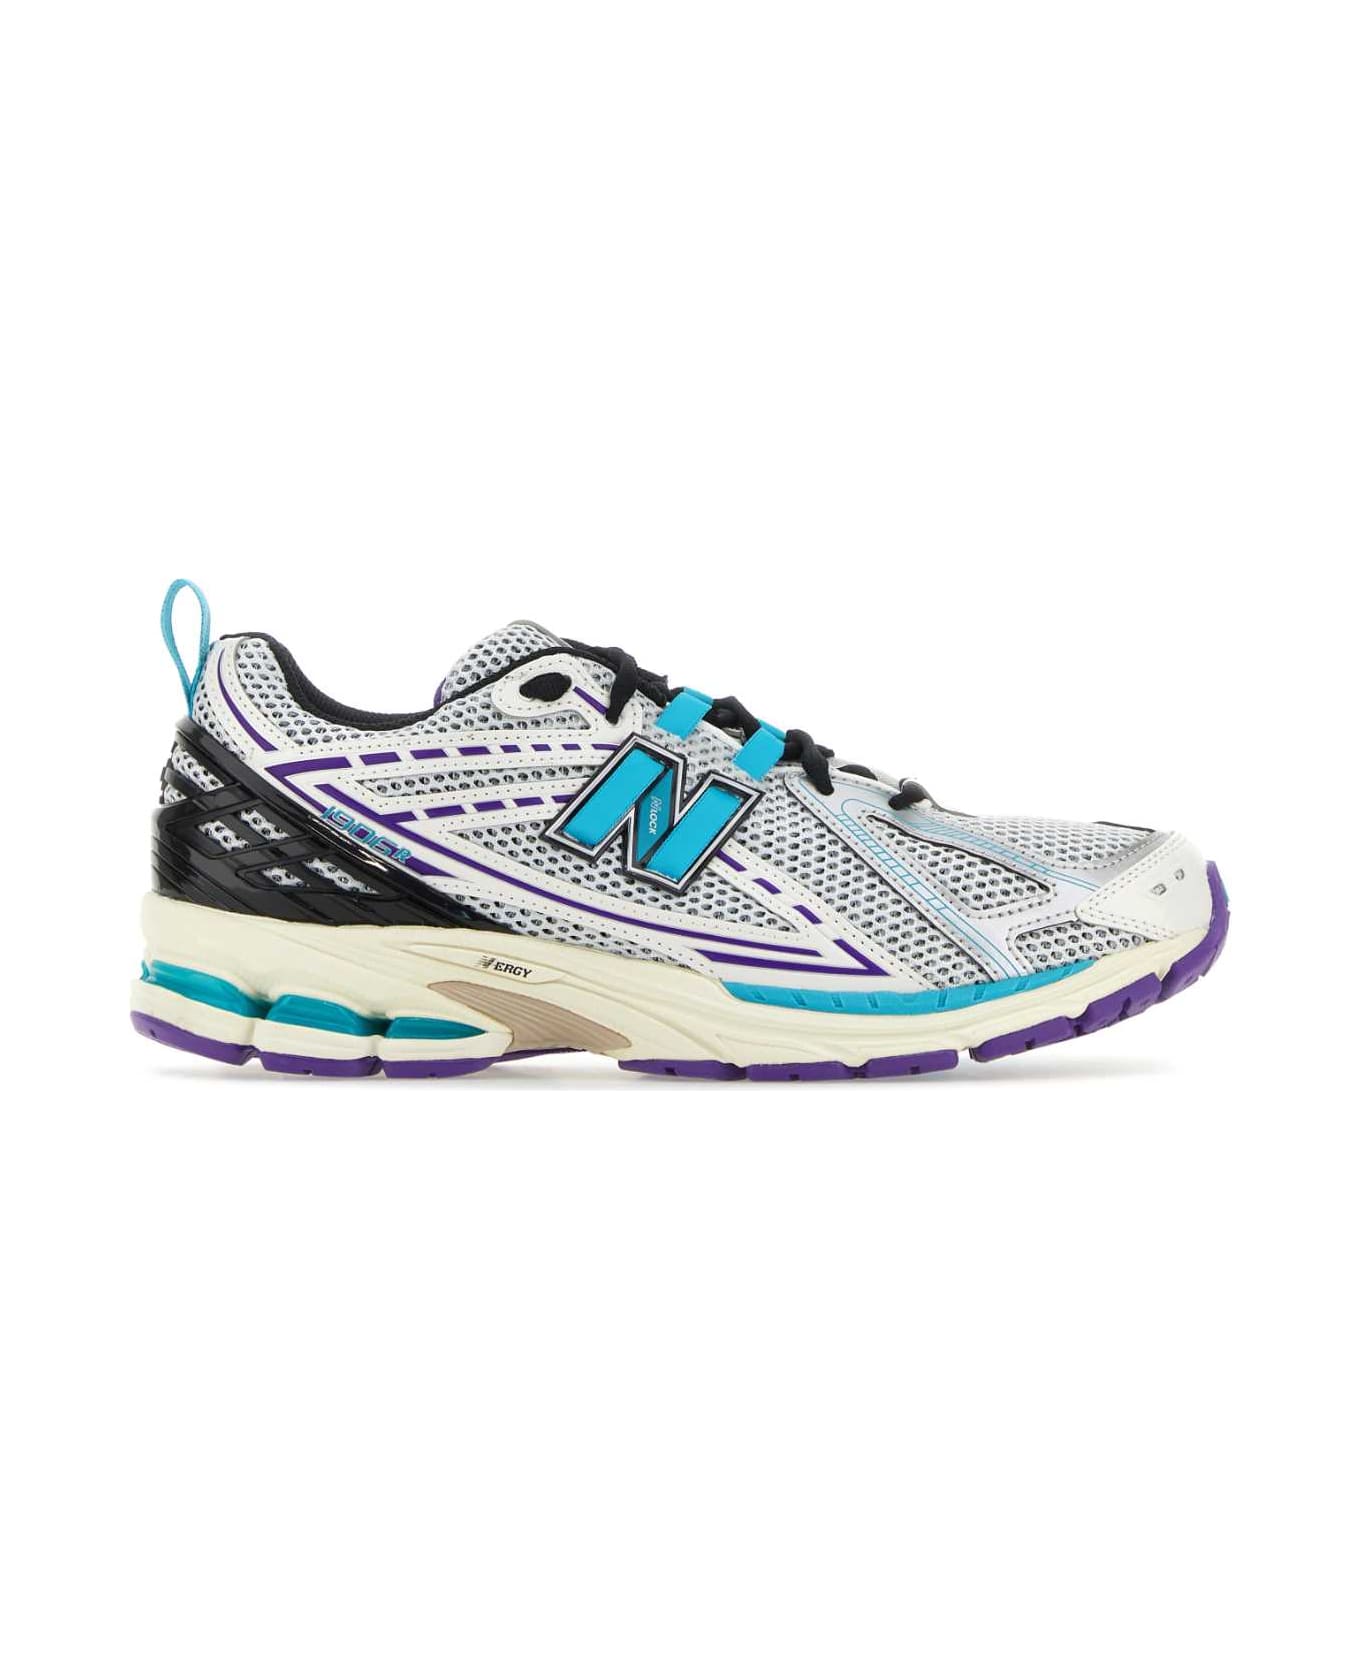 New Balance Multicolor Fabric And Mesh 1960r Sneakers - SILVERBLUE